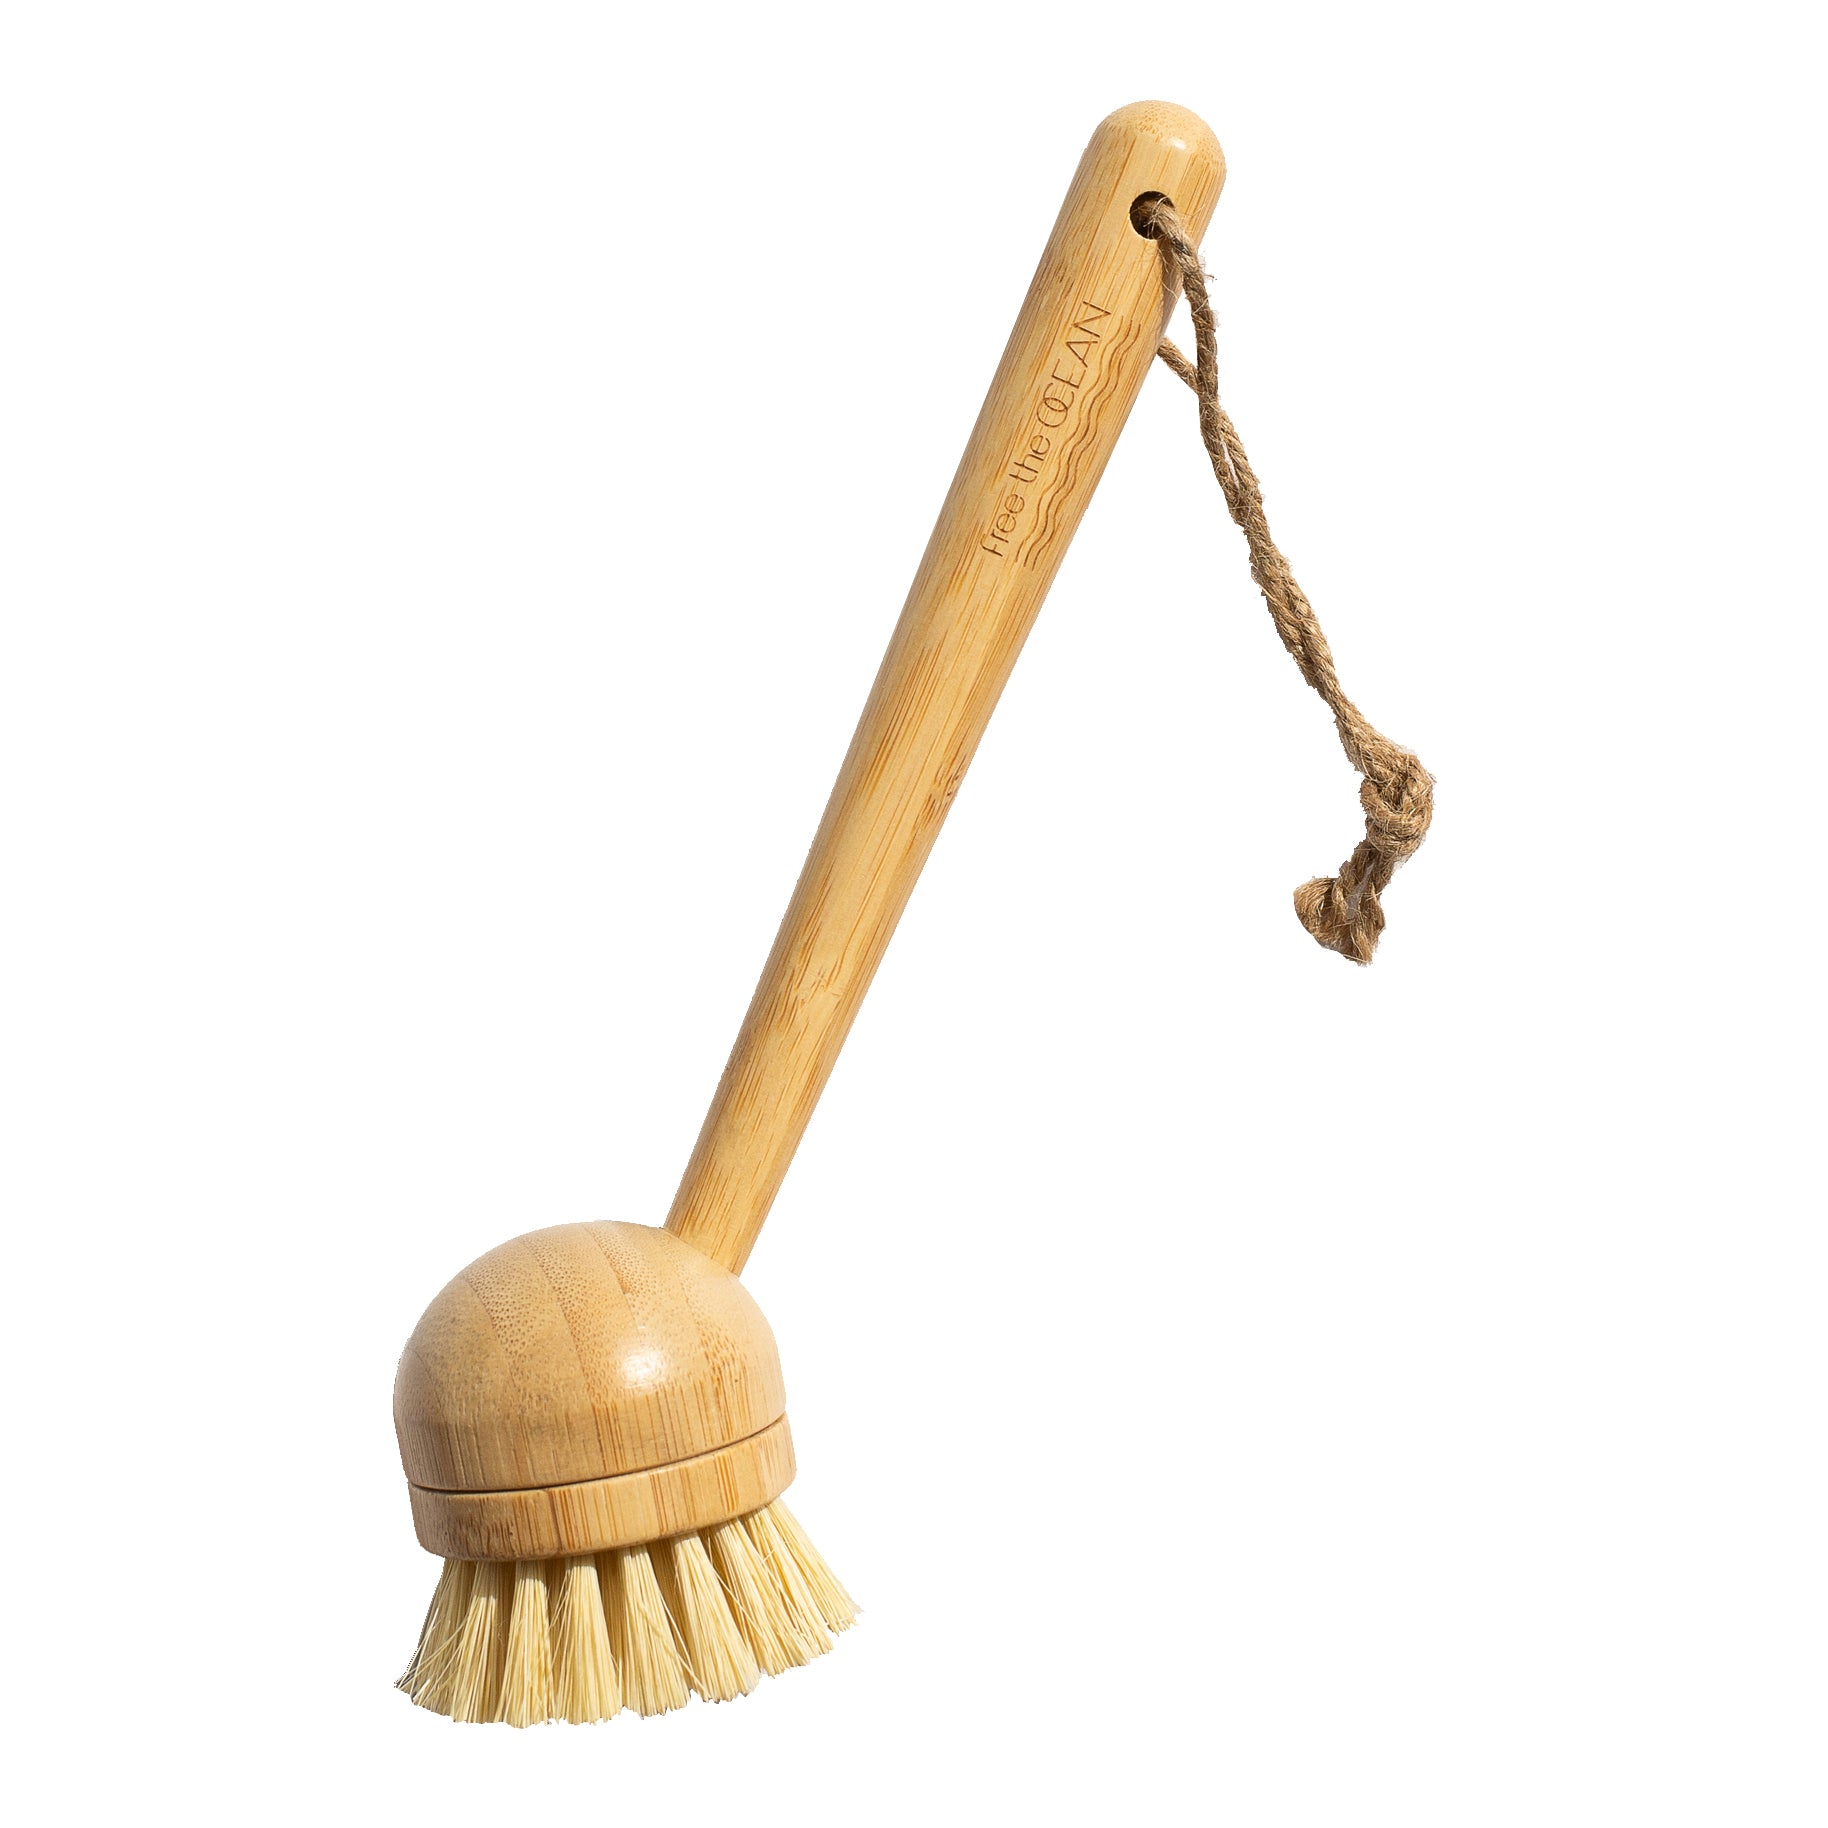 Swedish Everyday Dishbrush with Replaceable Head - Soft Bristle